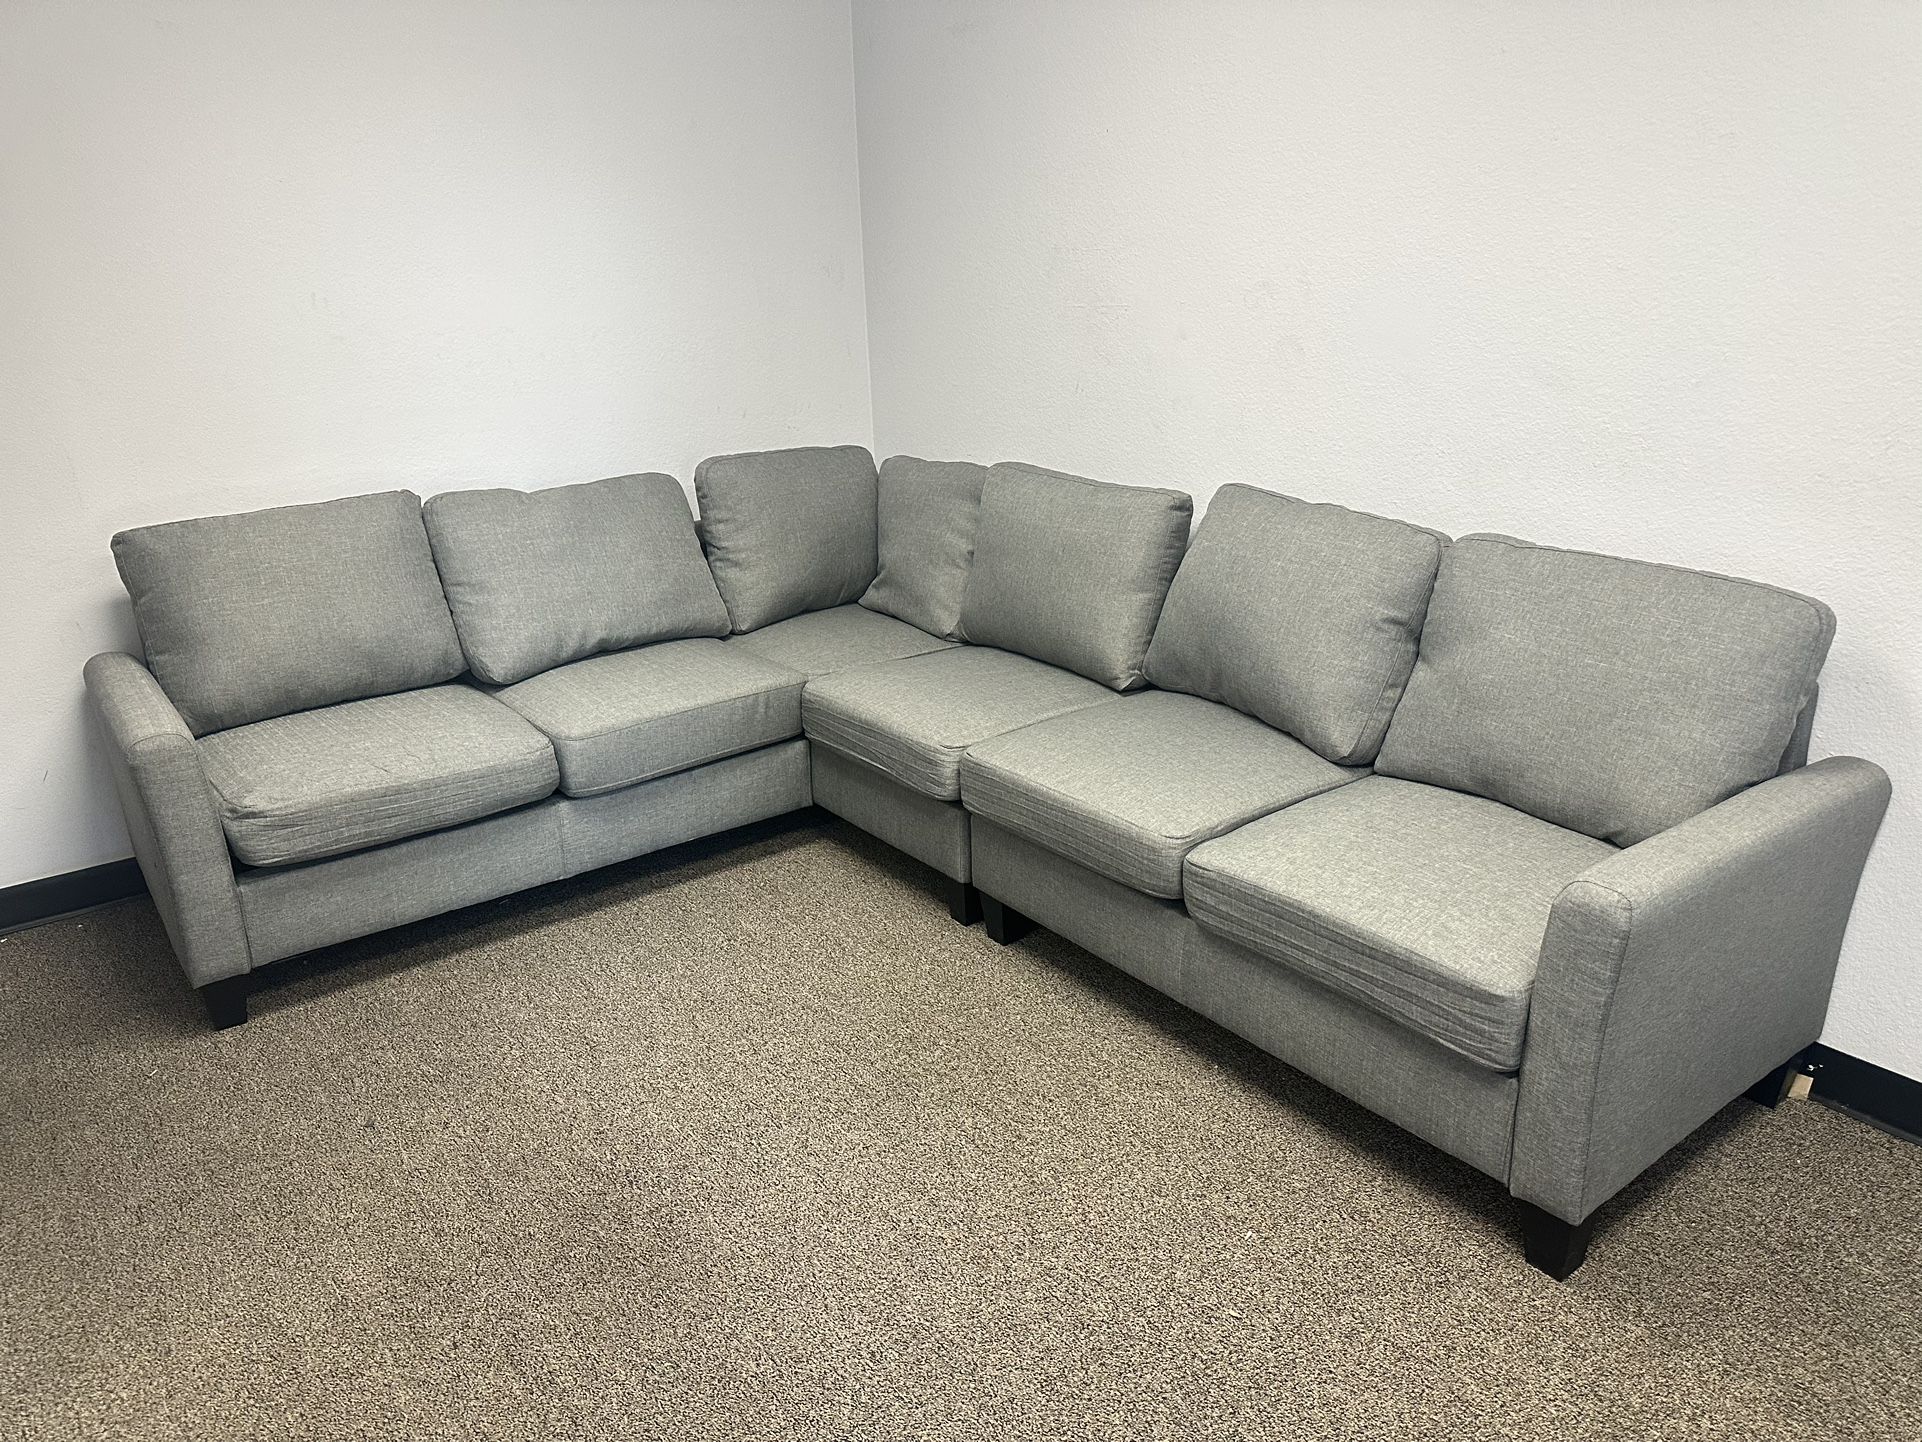 Temel 3 Piece Upholstered Sectional。LY8973